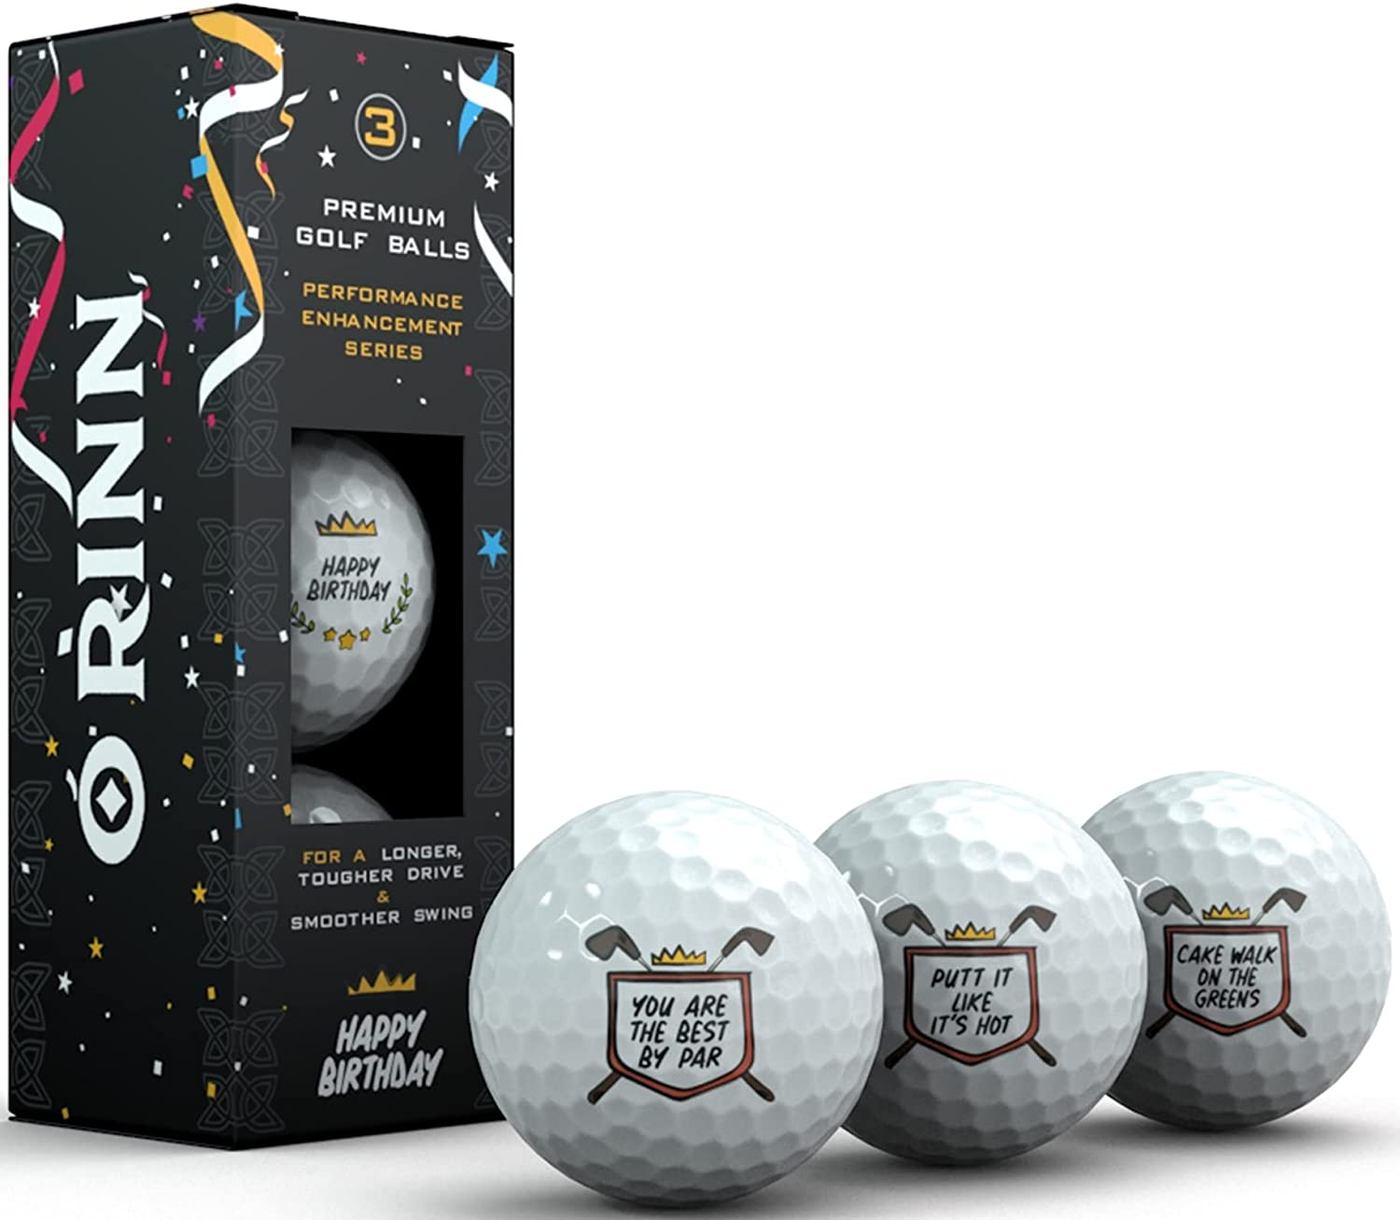 Happy Birthday Novelty Golf Ball 3 Pack - Golf Gifts for Men & Women - Party Decorations - Boss & Coworkers - Mom & Dad - Universal for All Birthdays - 40th - 50th - 60th - 70th - Includes HQ Sleeve